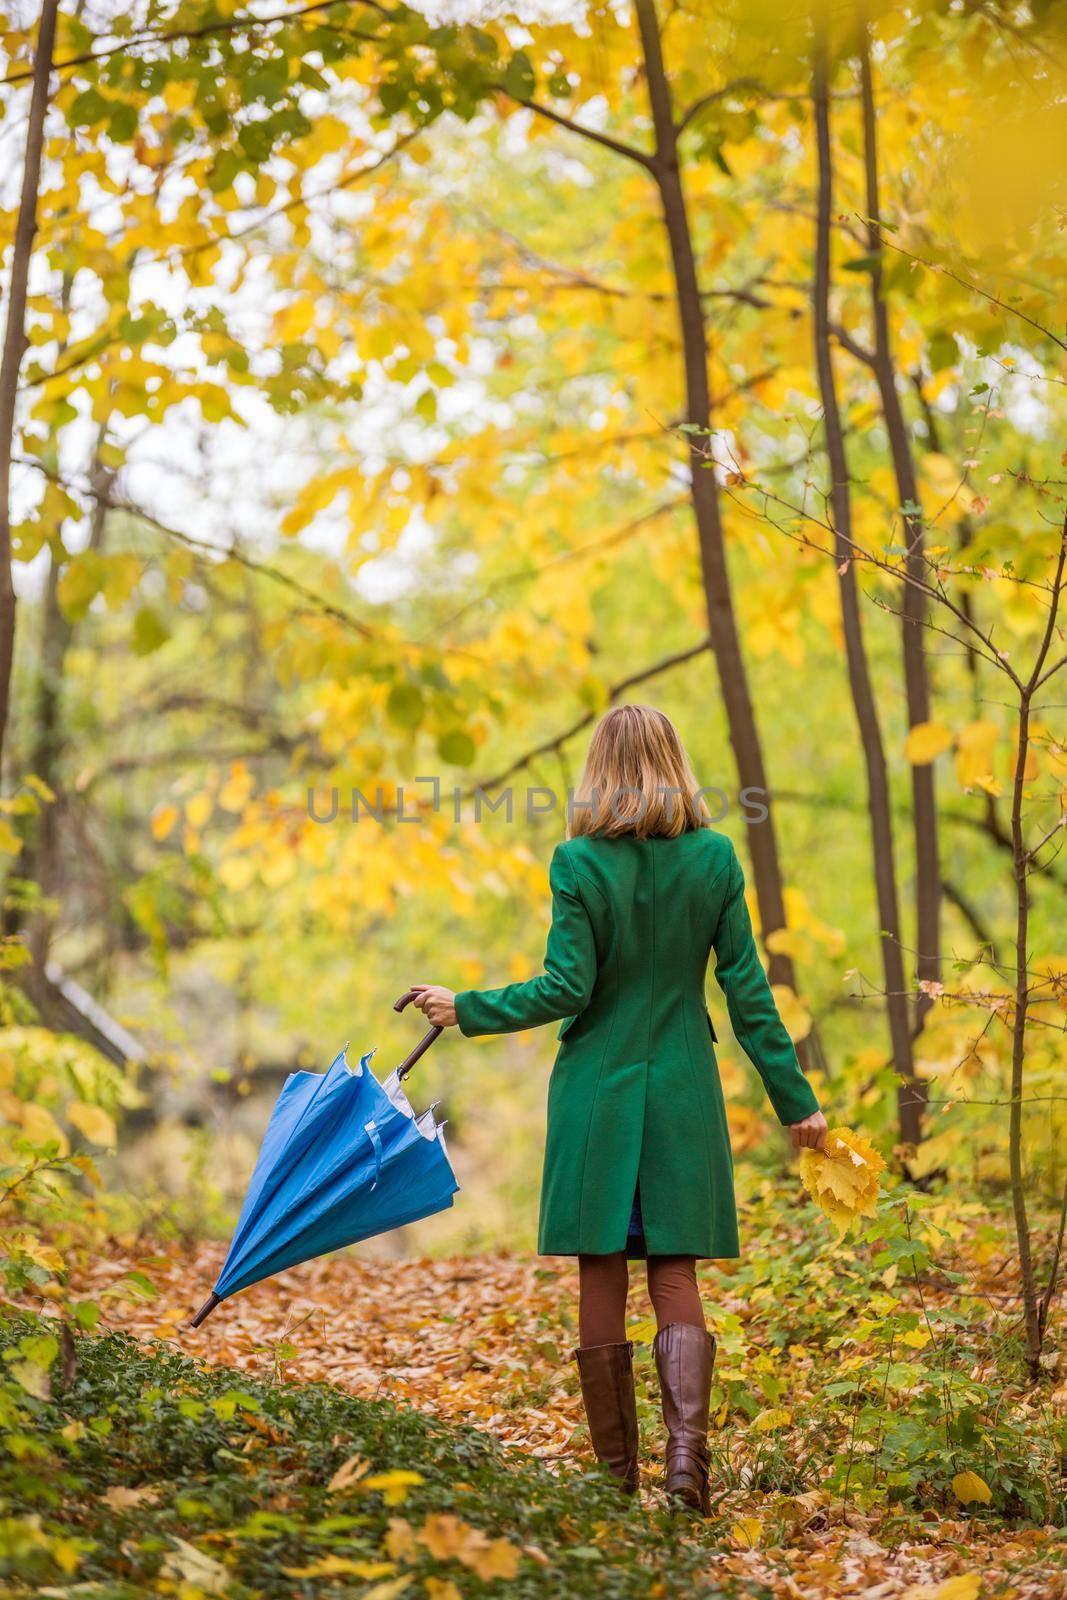 Woman with umbrella and fall leaves walking in the park by Bazdar